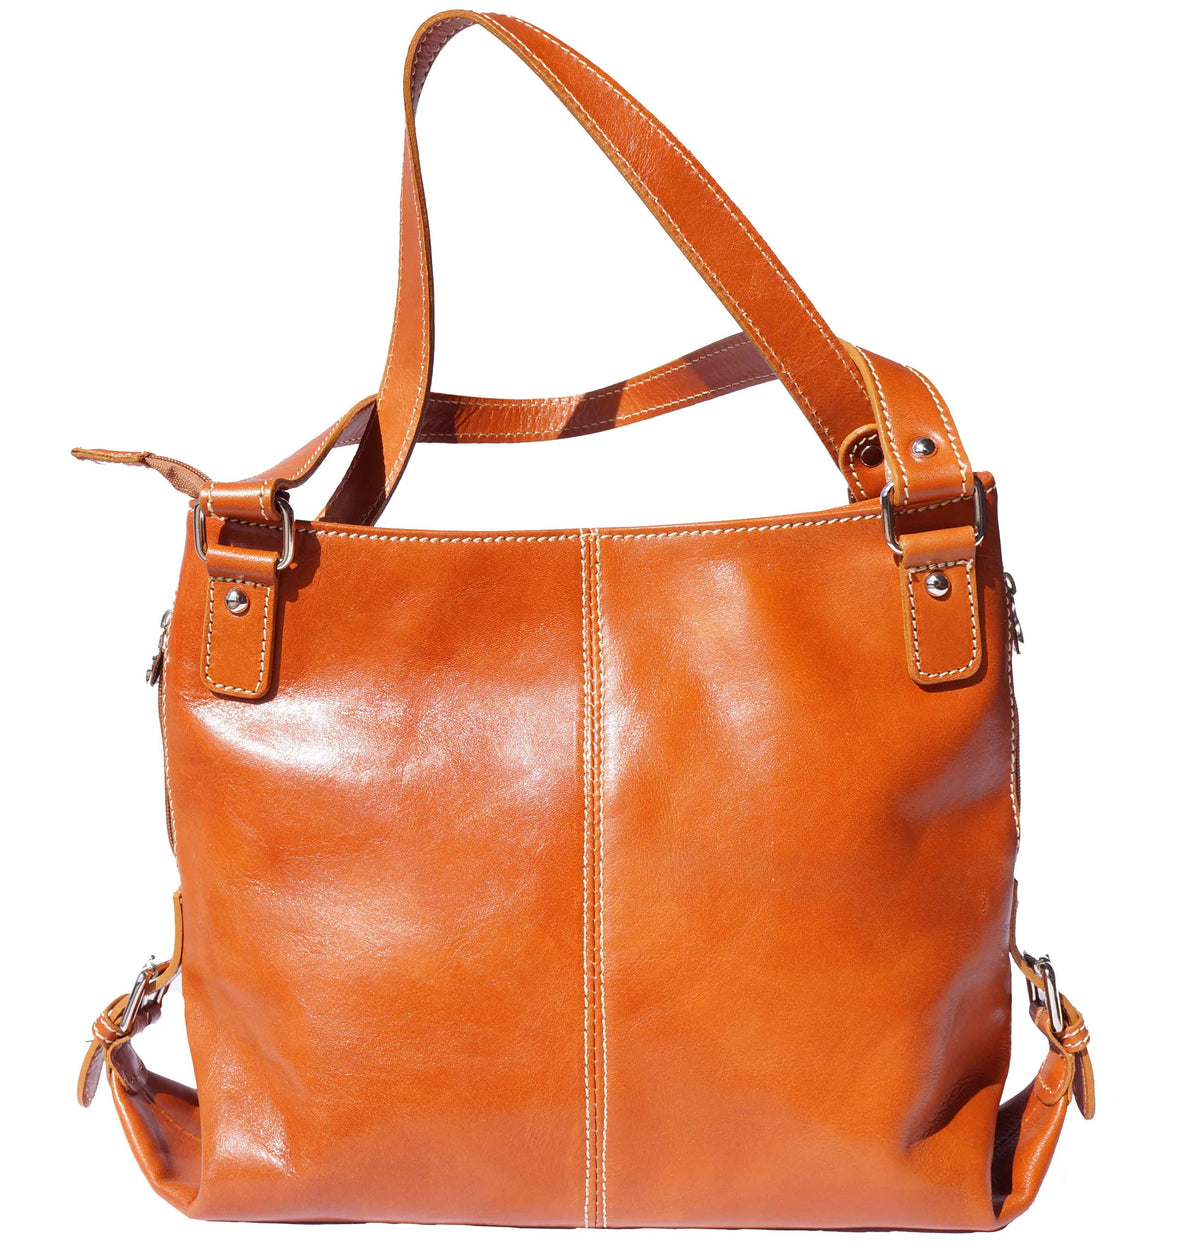 Tan Italian leather shopping bag with double handle